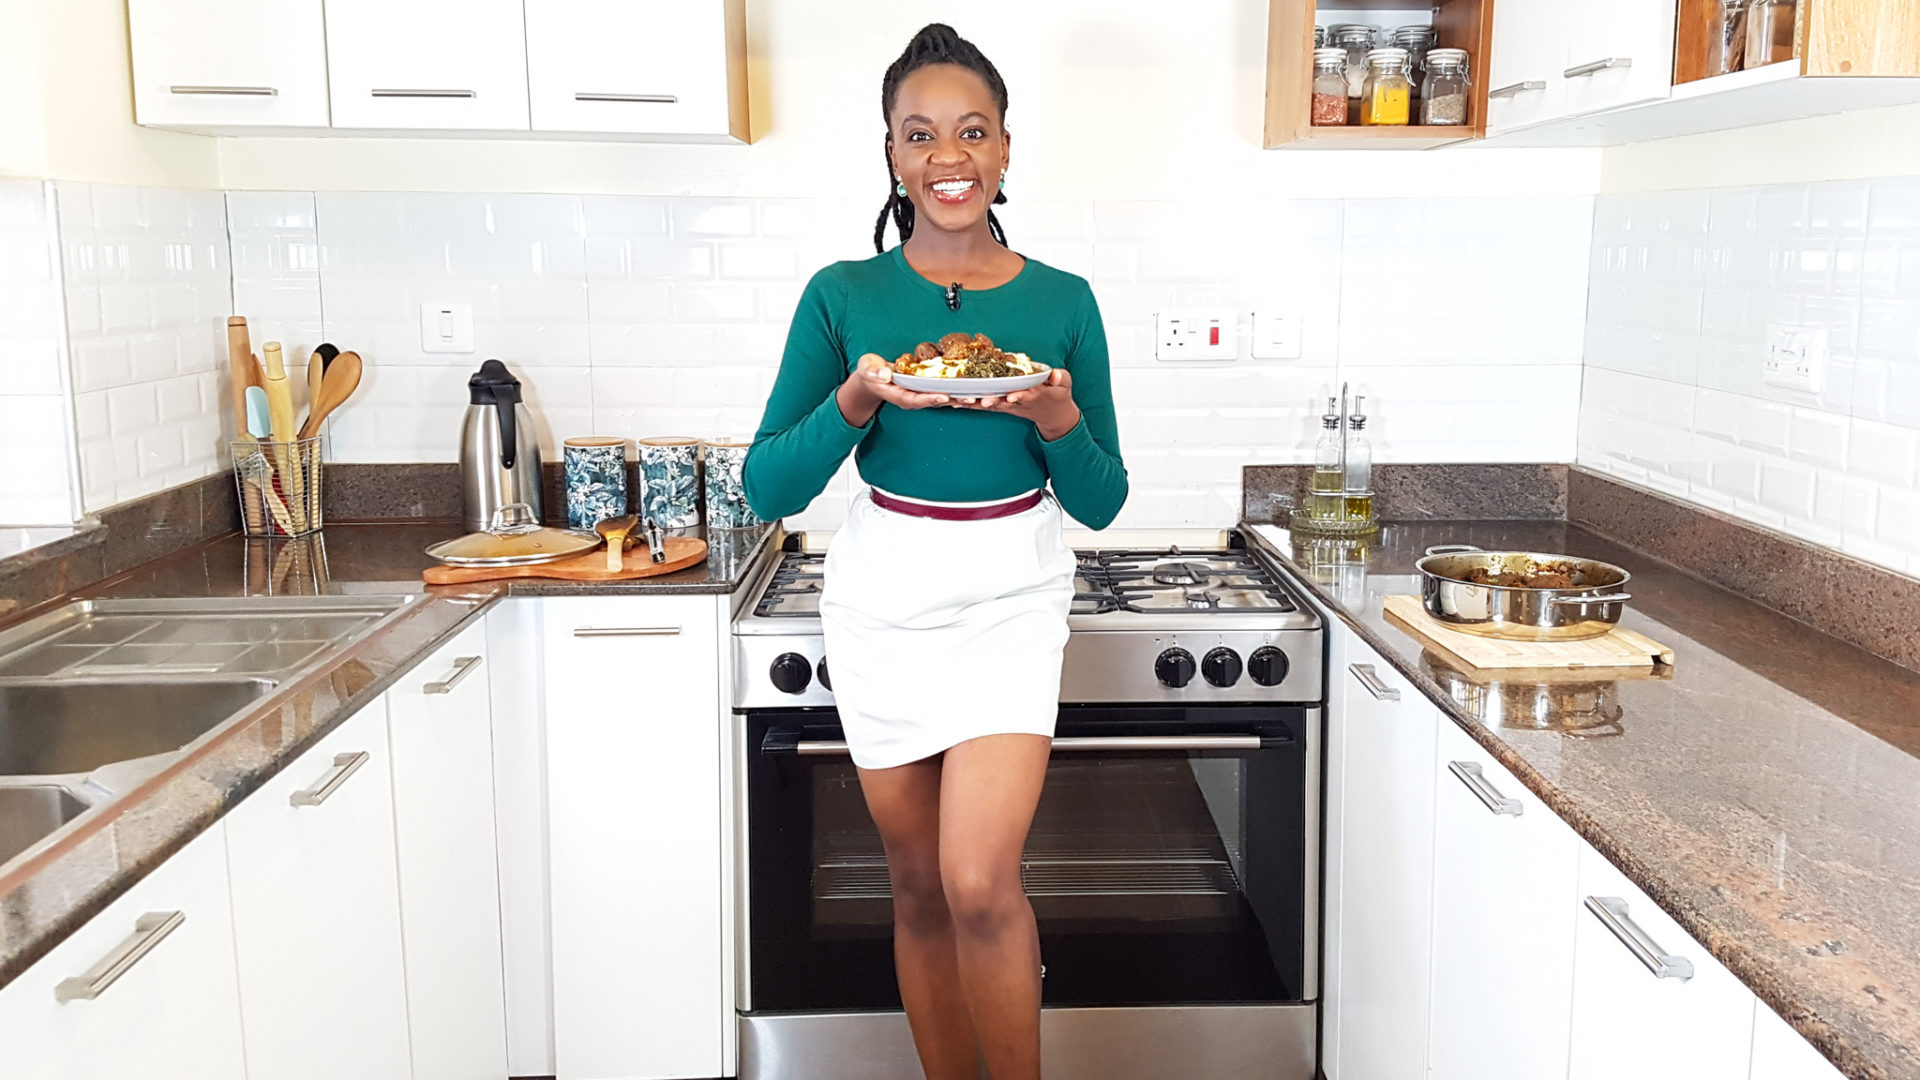 Kaluhi Adagala is among the top 5 Food content creators, bloggers and Youtubers in Africa and without doubt the reigning most tangibly influential in Kenya.